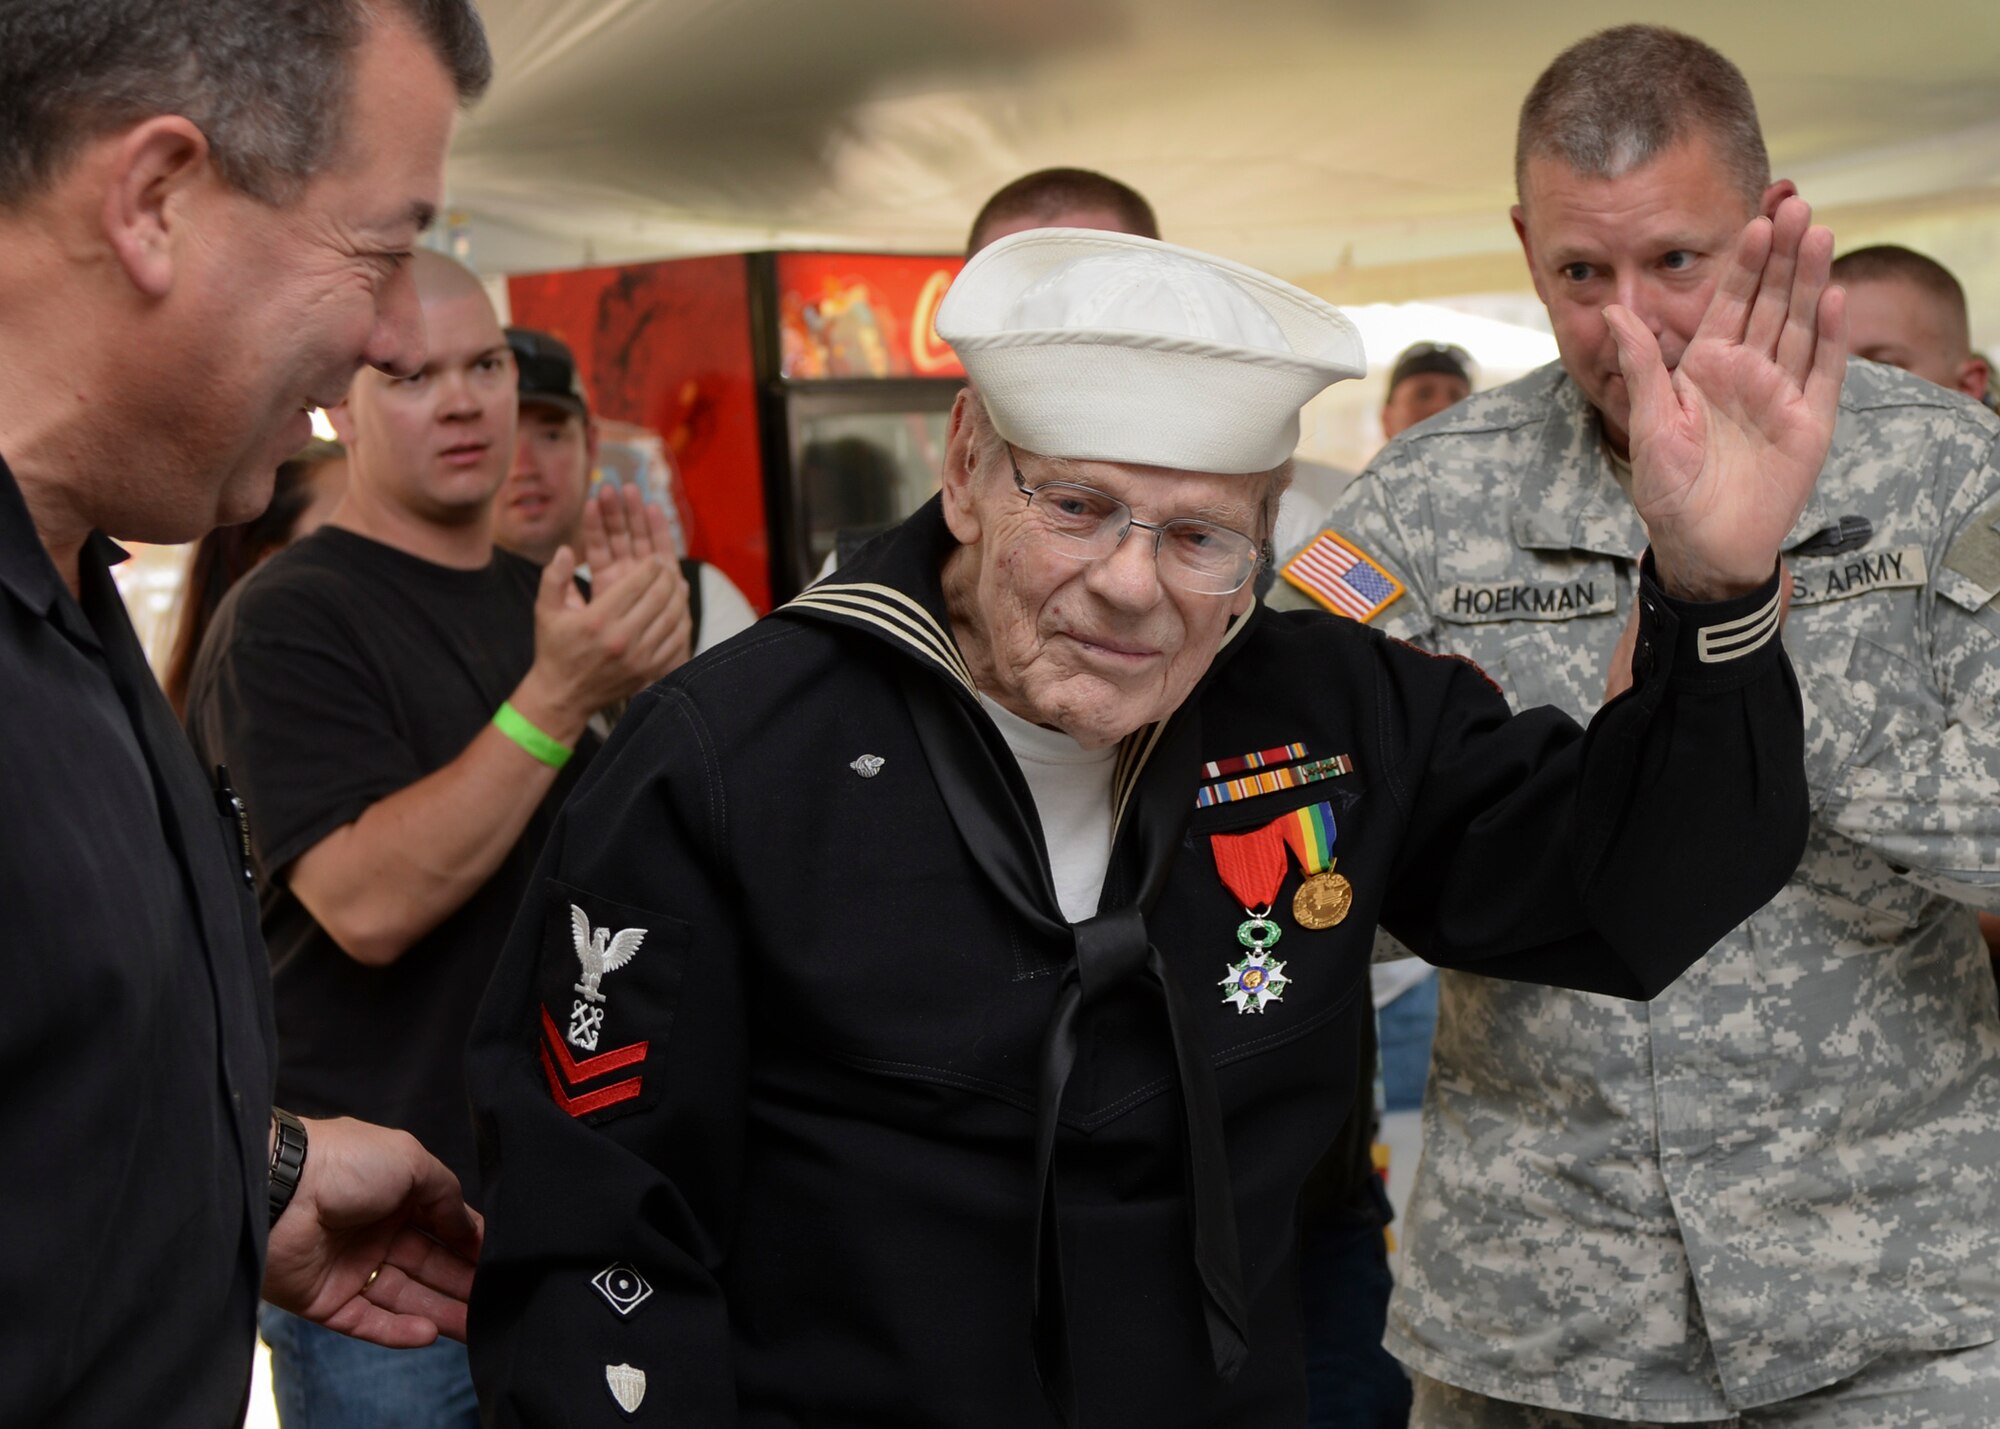 Gordon Lease, former Coast Guard Boatswains Mate, was one of two honored during a veterans recognition ceremony at Sturgis, S.D., Aug. 9, 2016. Lease is a WWII veteran who earned the Legion d’honneur, the highest French order for military and civil merits, for his support of the Normandy invasion where his crew transported 265 soldiers and sailors from the shoreline to England for medical treatment. (U.S. Air Force photo by Senior Airman Anania Tekurio/Released)